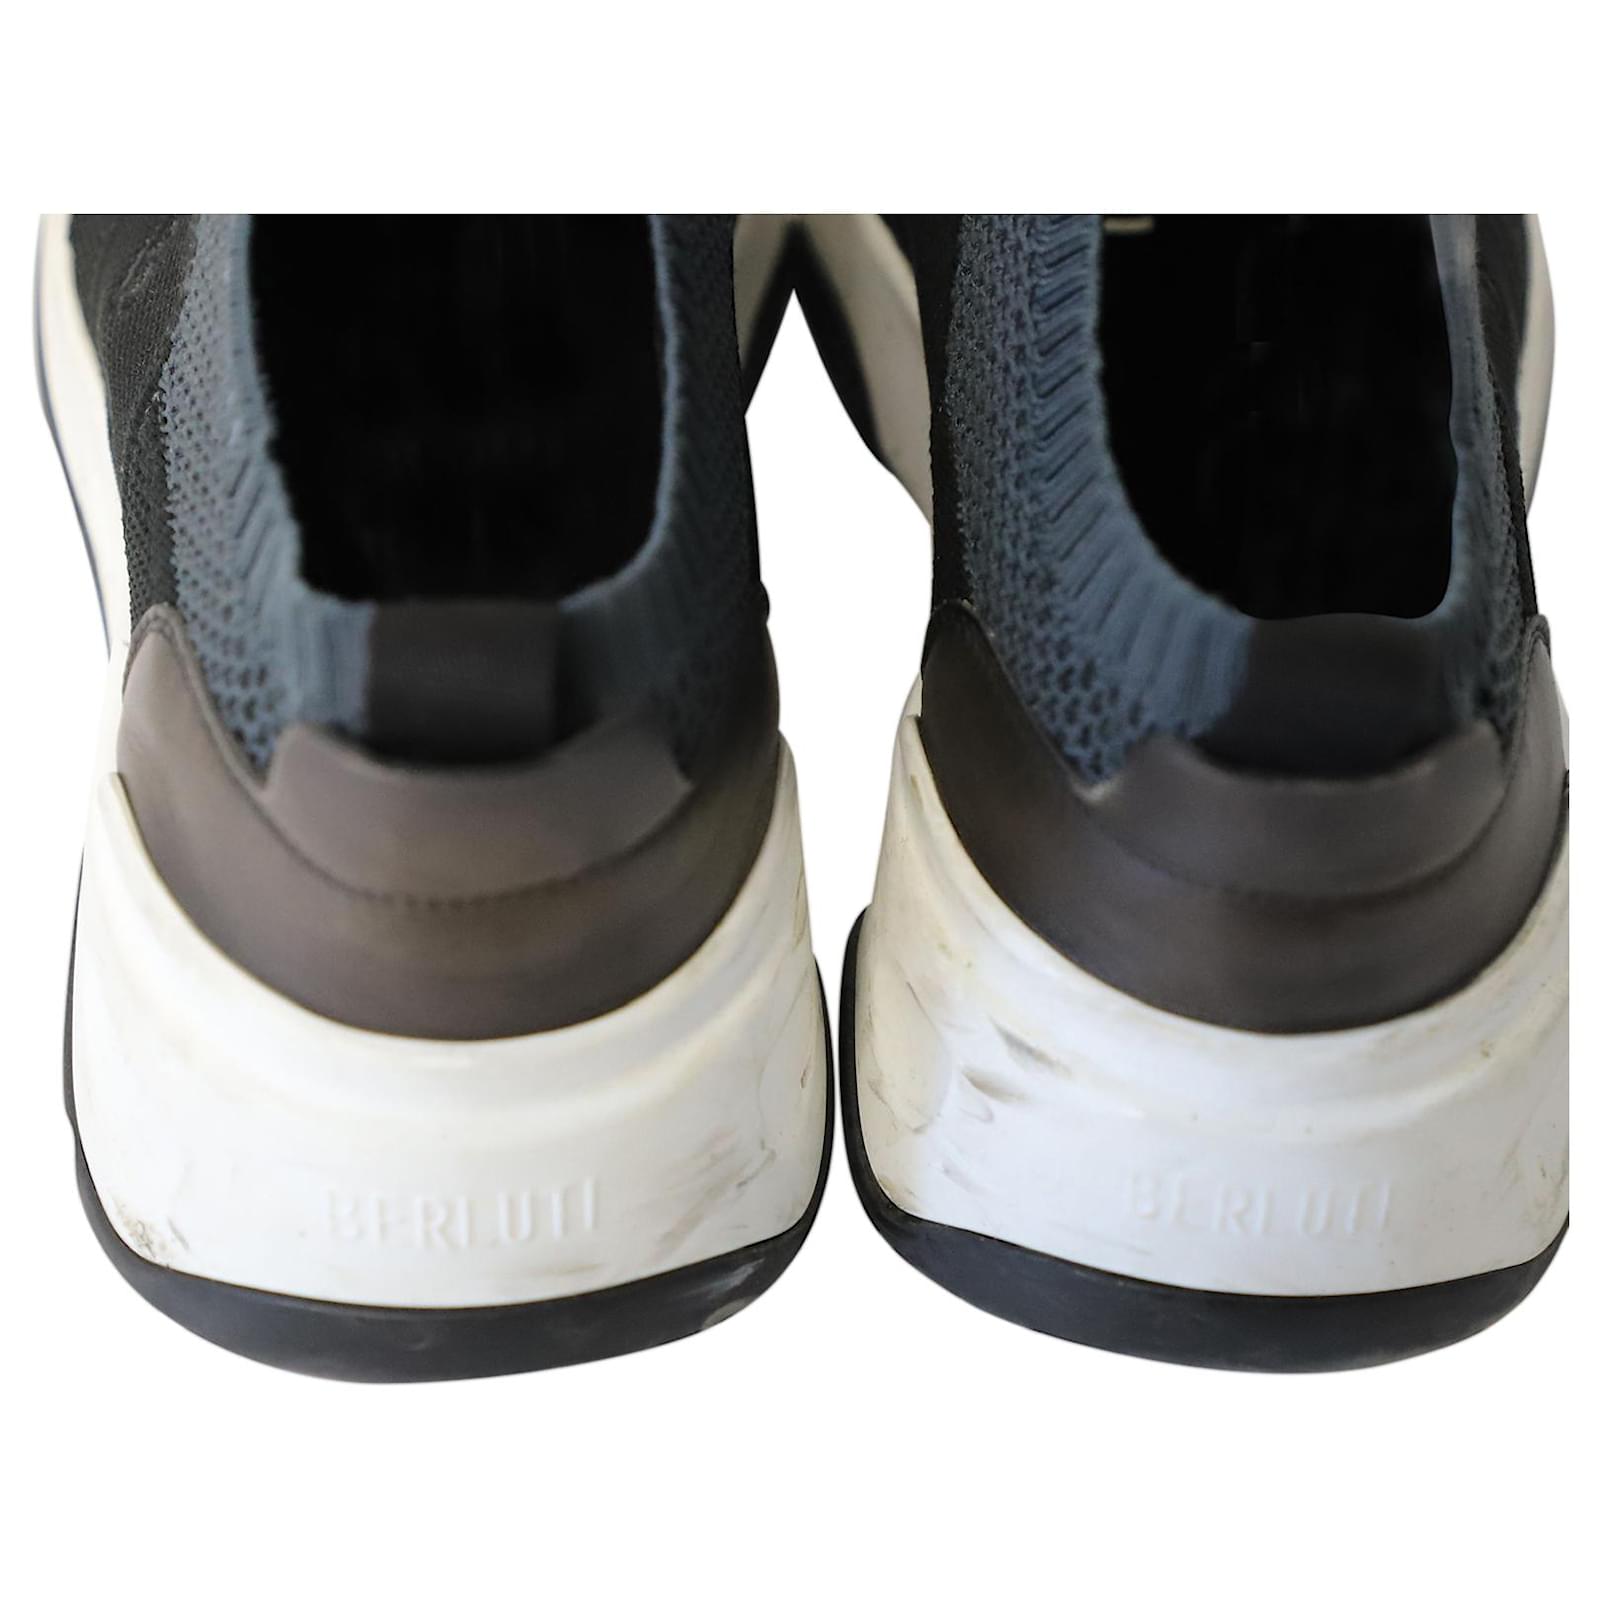 Berluti Shadow Leather Trimmed Low Top Sneakers in Black and Blue ...